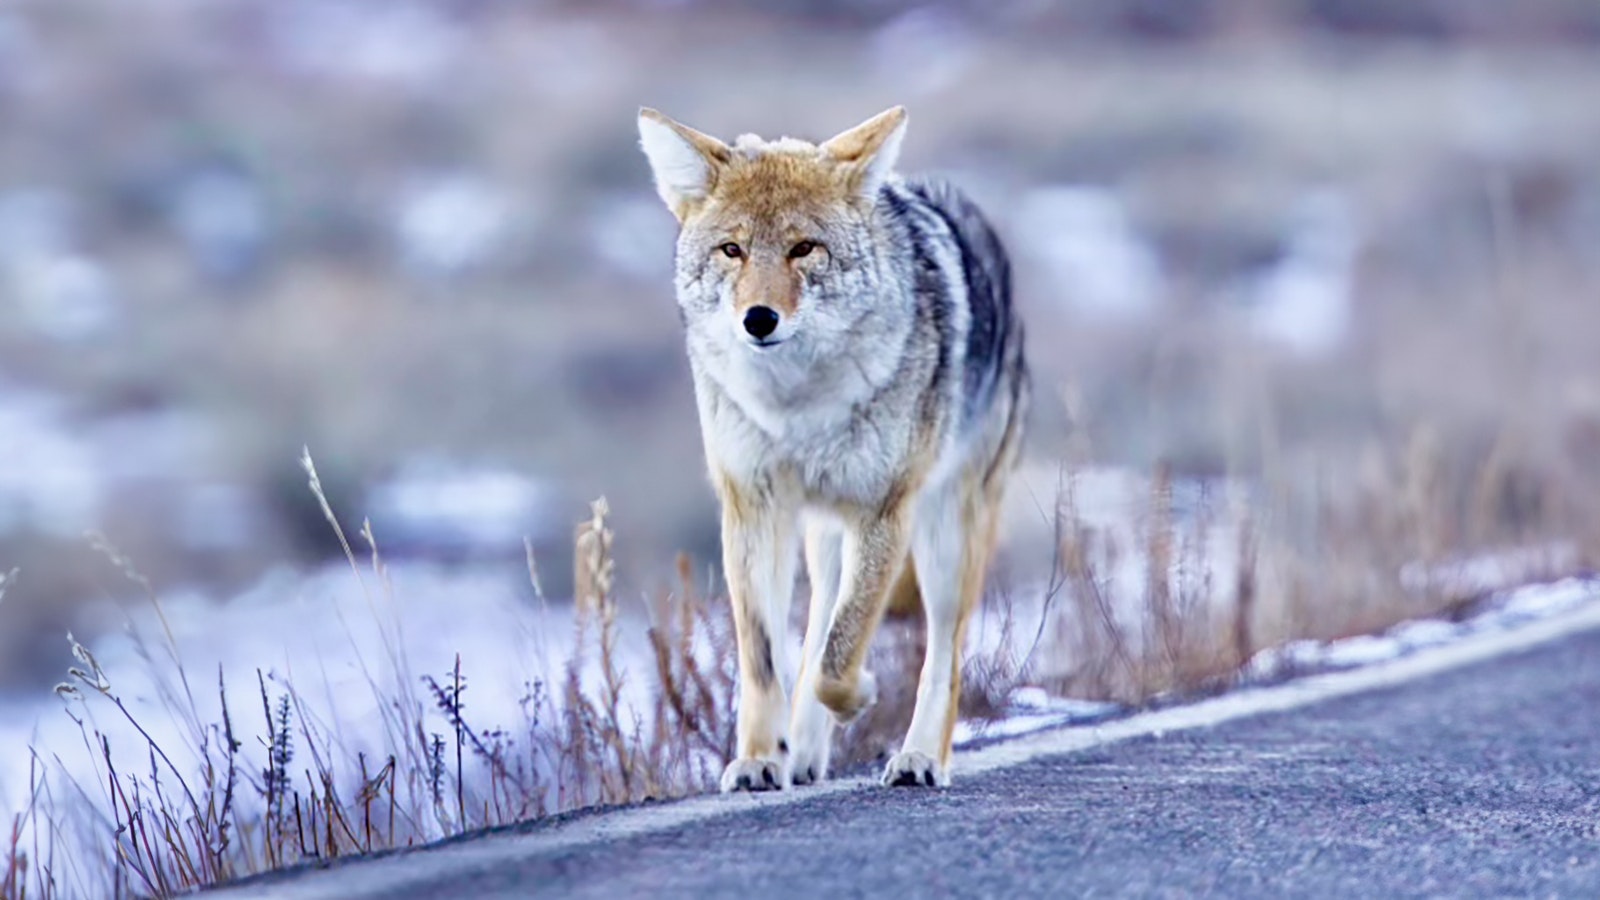 Limpy the coyote, also known as Tripod, frequents the roadside in Yellowstone National Park, where he tries to score snacks by looking pathetic for tourists.